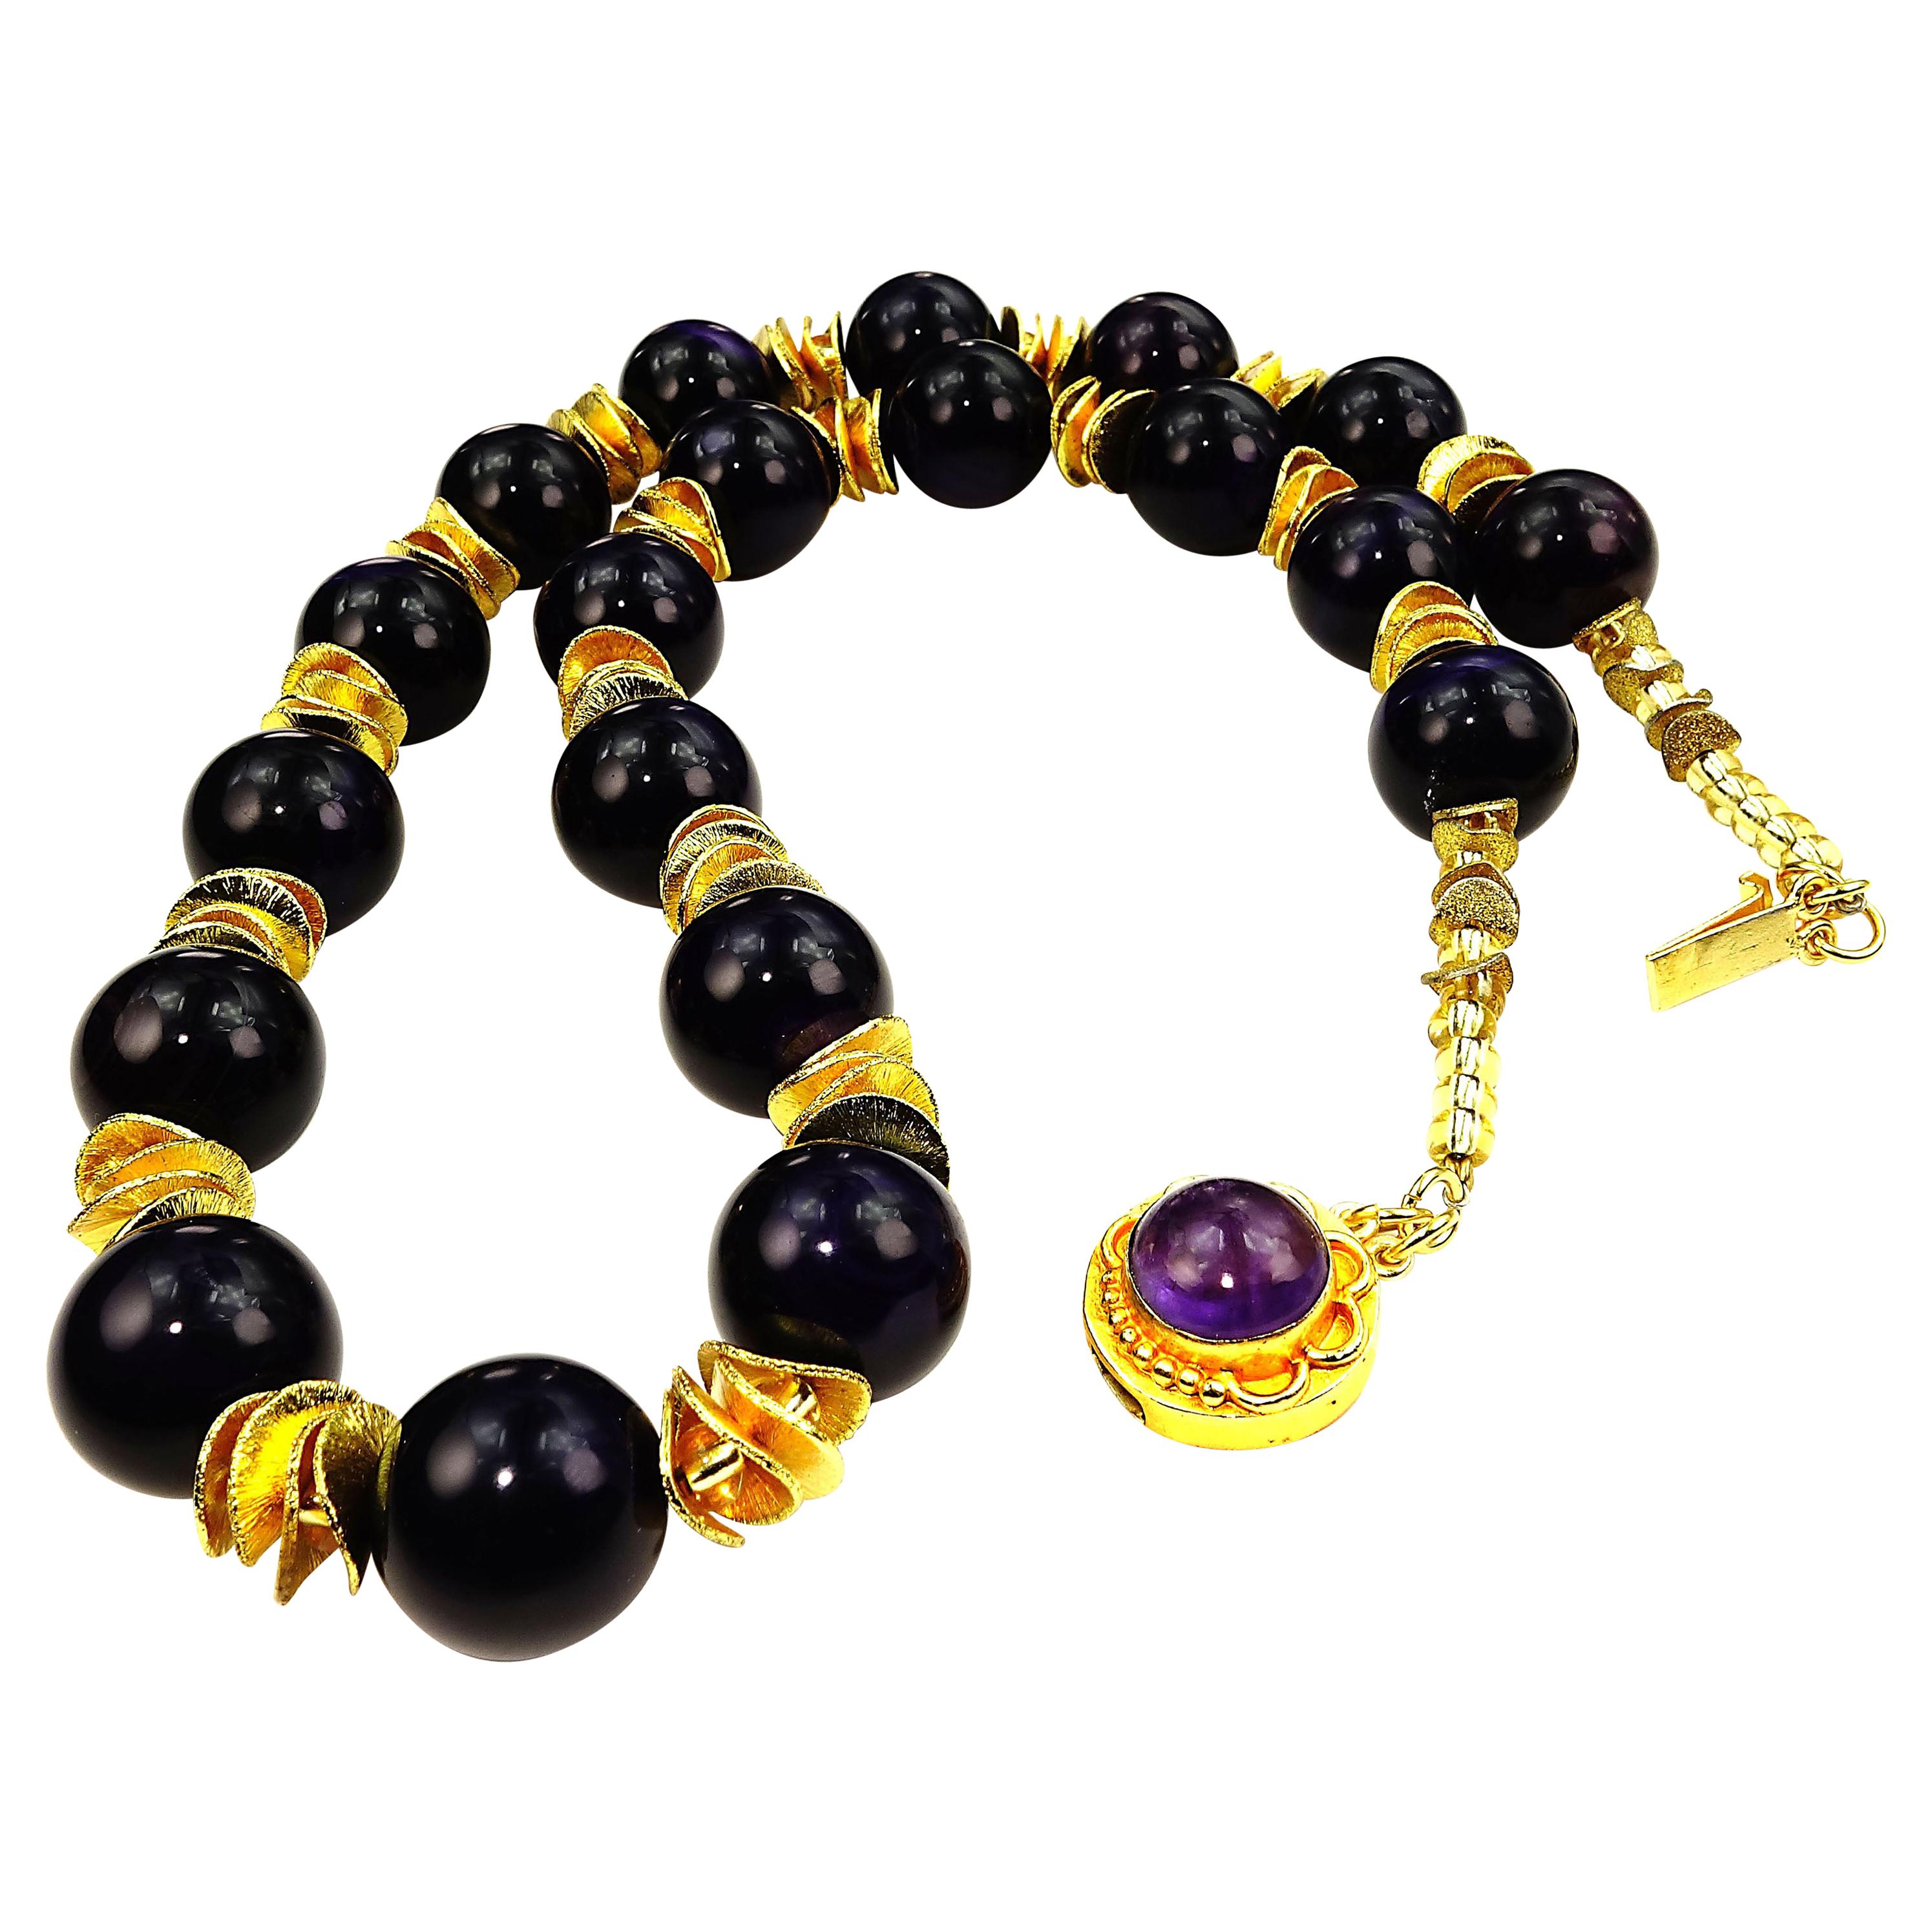 Bead AJD 23 Inch Necklace of Polished Amethyst with Gold Accents February Birthstone For Sale